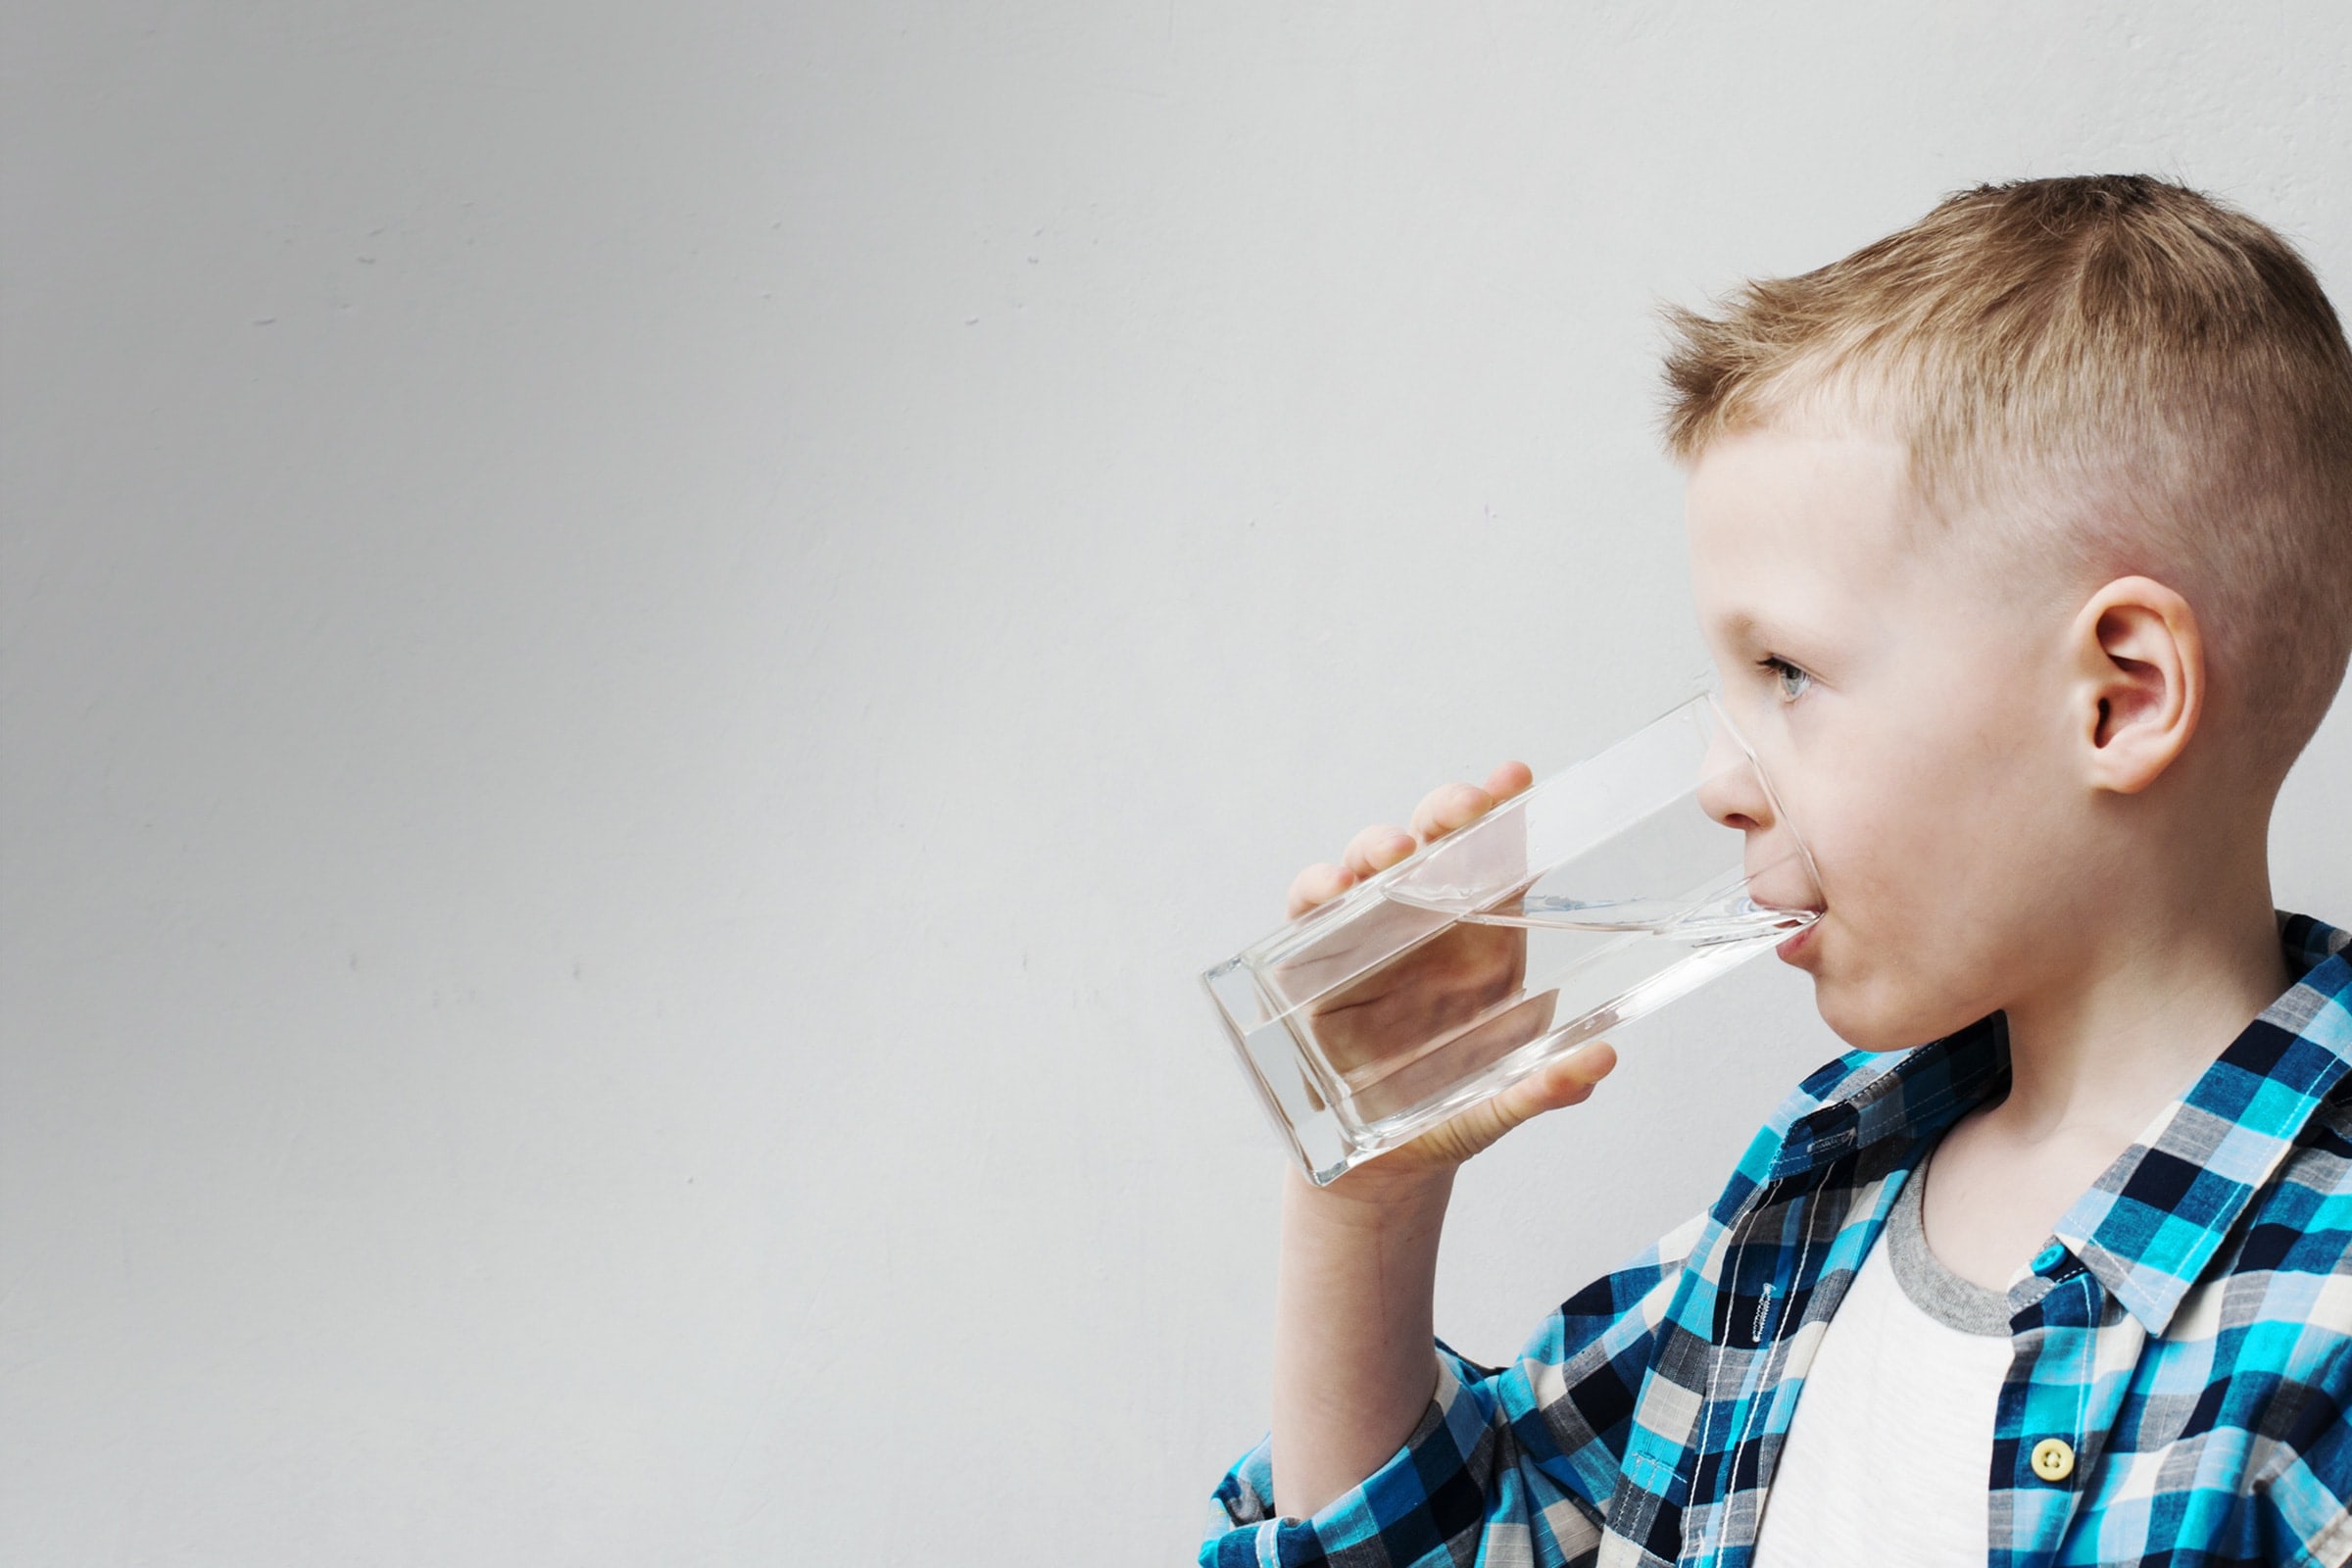 Kid drinking water out of a glass